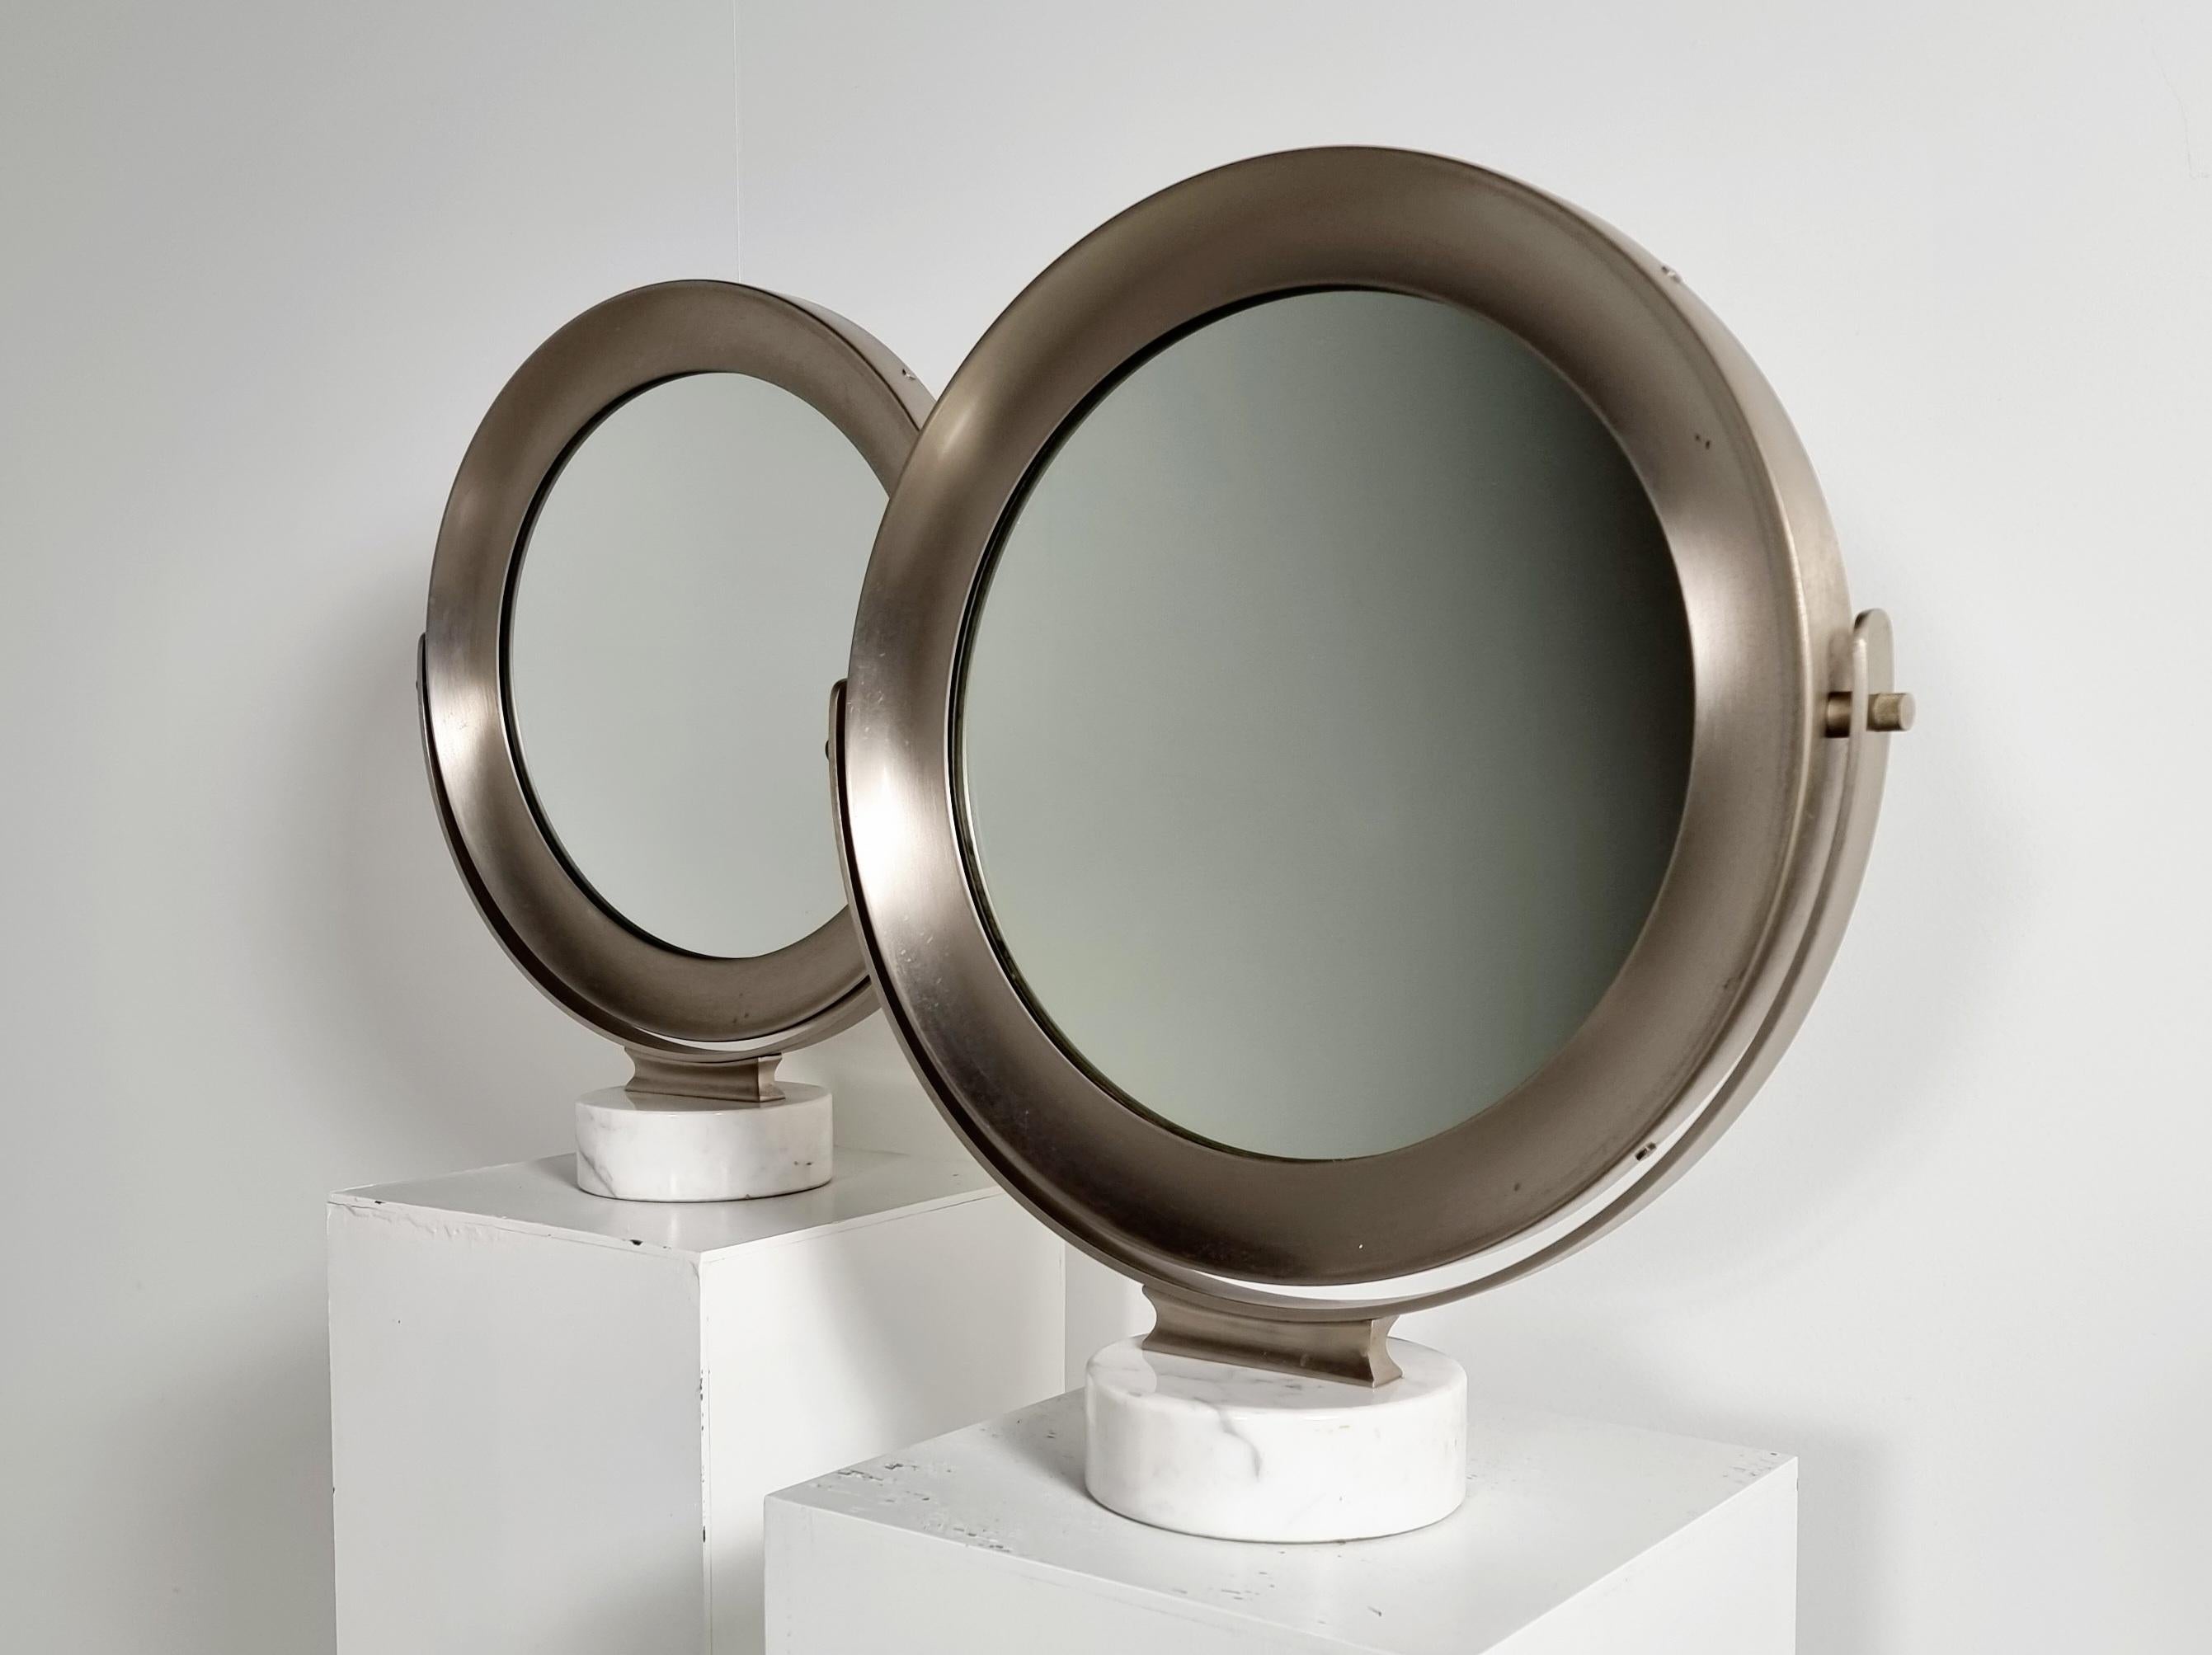 Carrara marble and steel Narciso table mirror by Sergio Mazza for Artemide, the 1970s. With a cylindrical base in white Carrara marble and support structure for the tilting mirror in satin steel, as well as the frame itself.